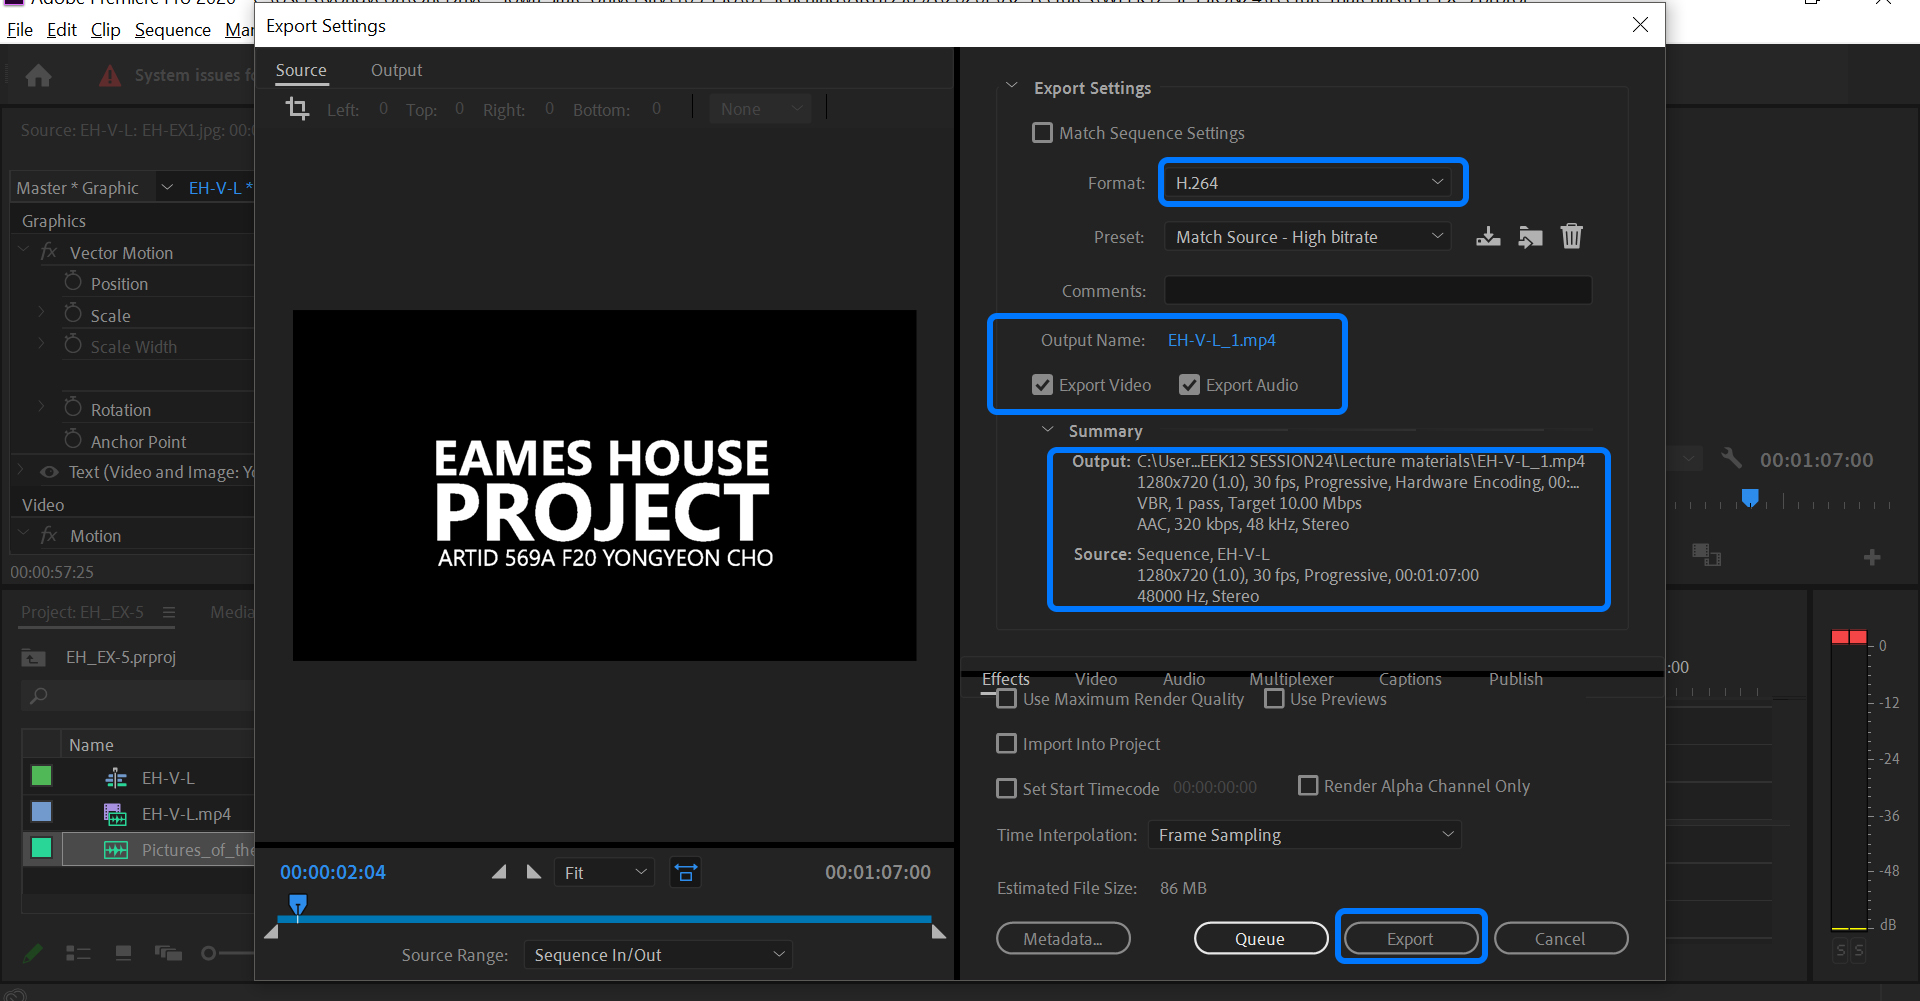 It indicates how to set for exporting the video.